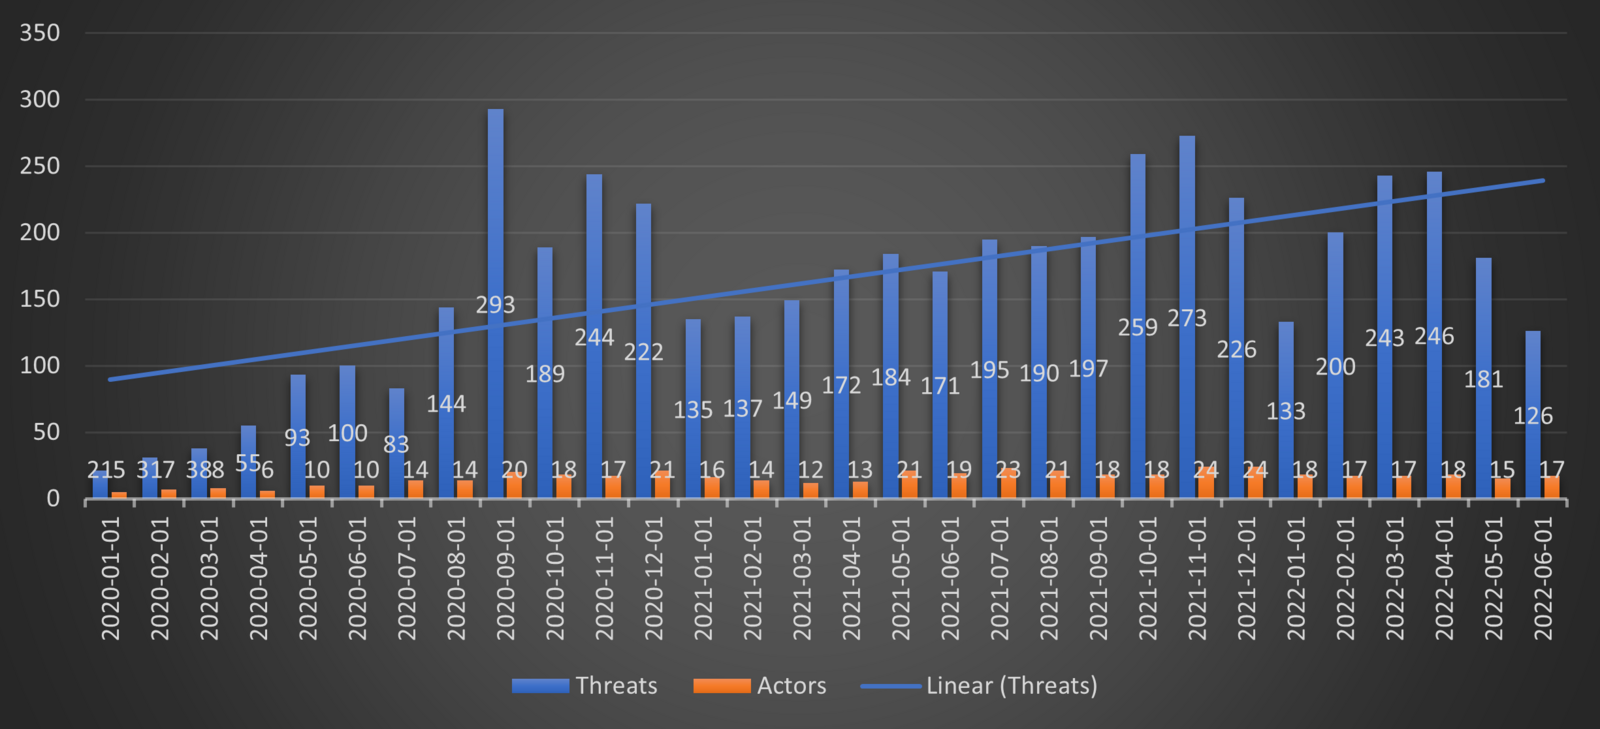 Cyber extortion threats and contributing threat actors over time 